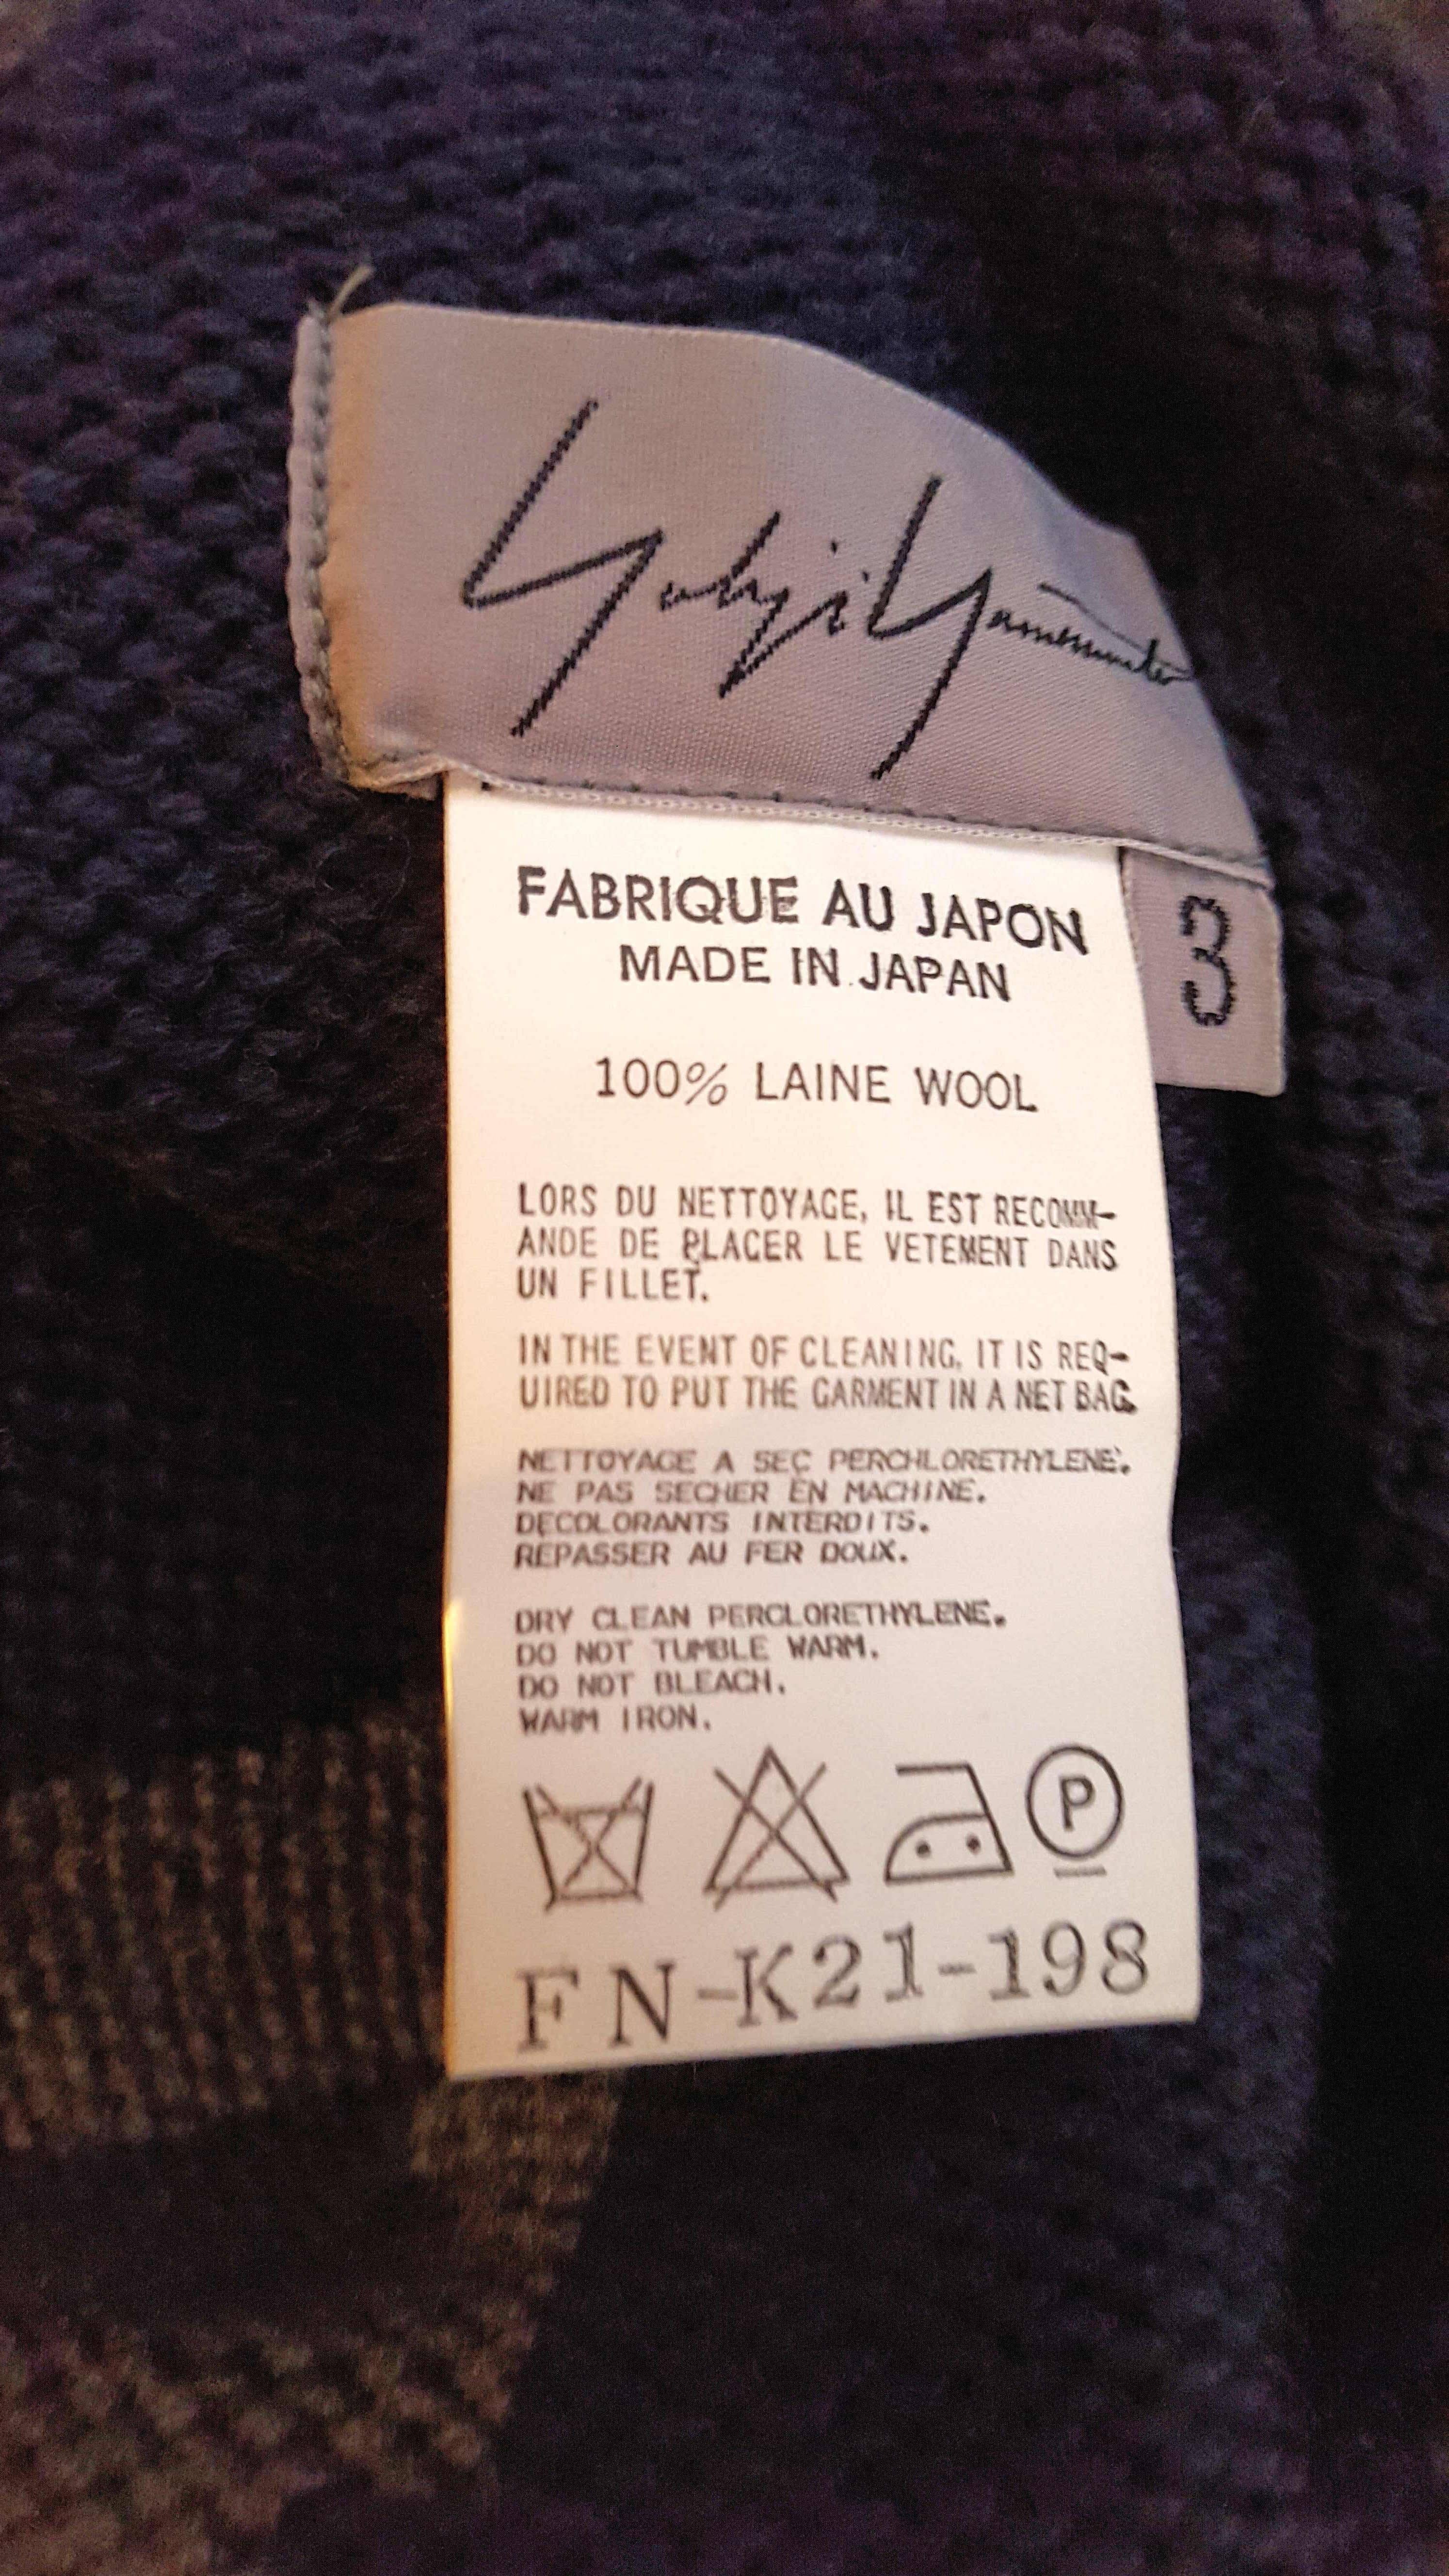 Yohji Yamamoto Navy Knit Sweater Dress In Excellent Condition For Sale In New York, NY